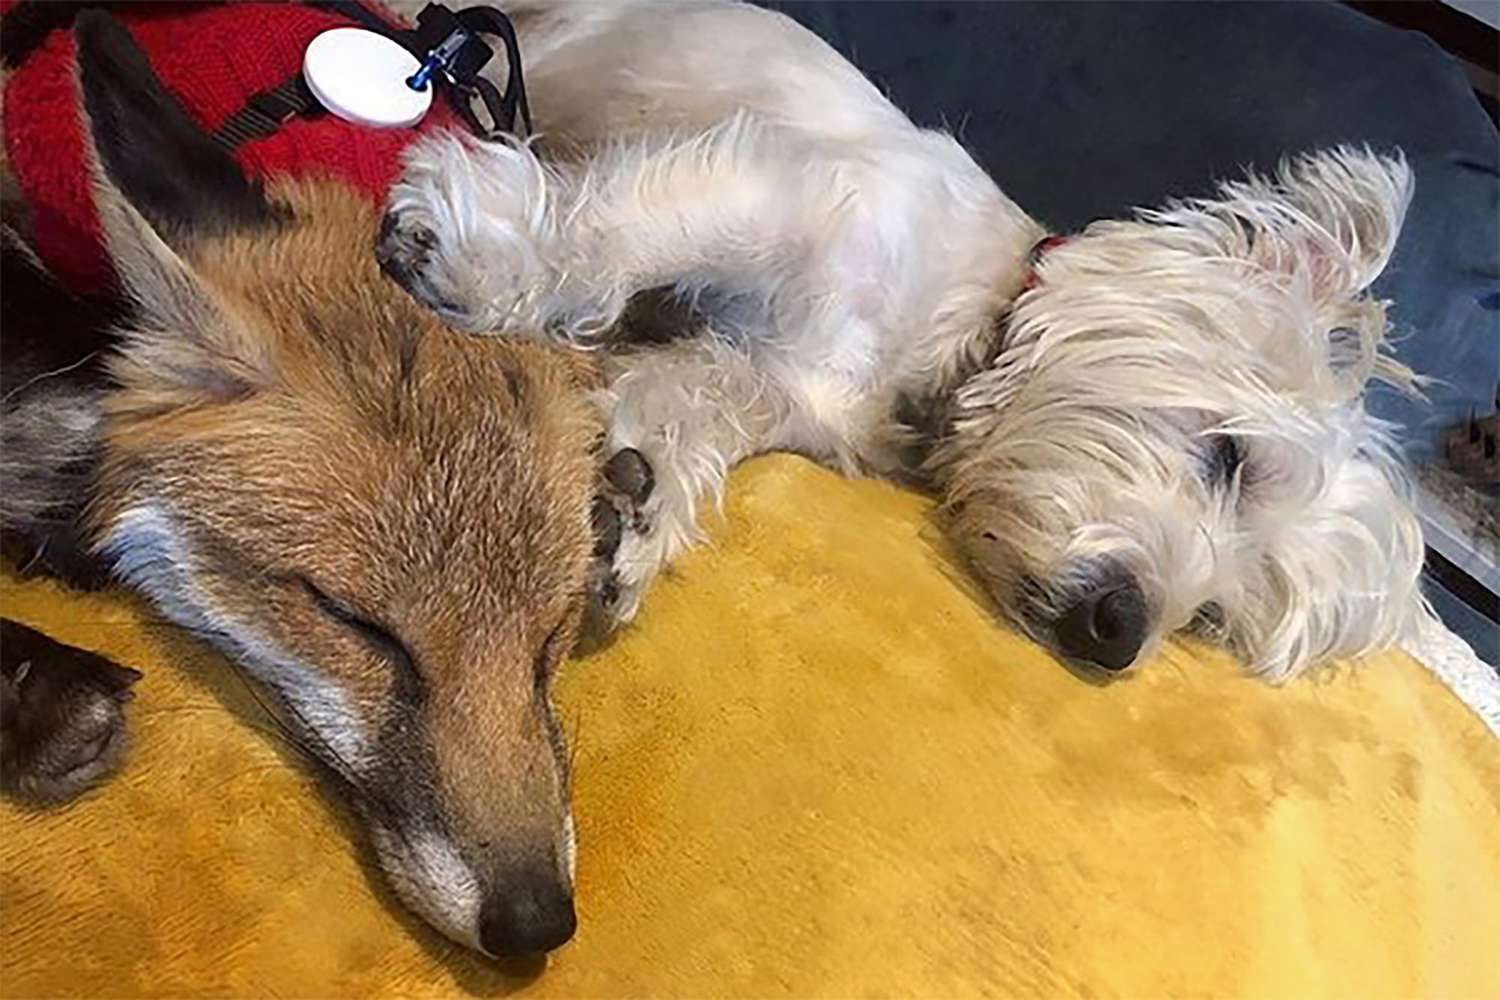 the fox and the hound snuggled together, sound asleep